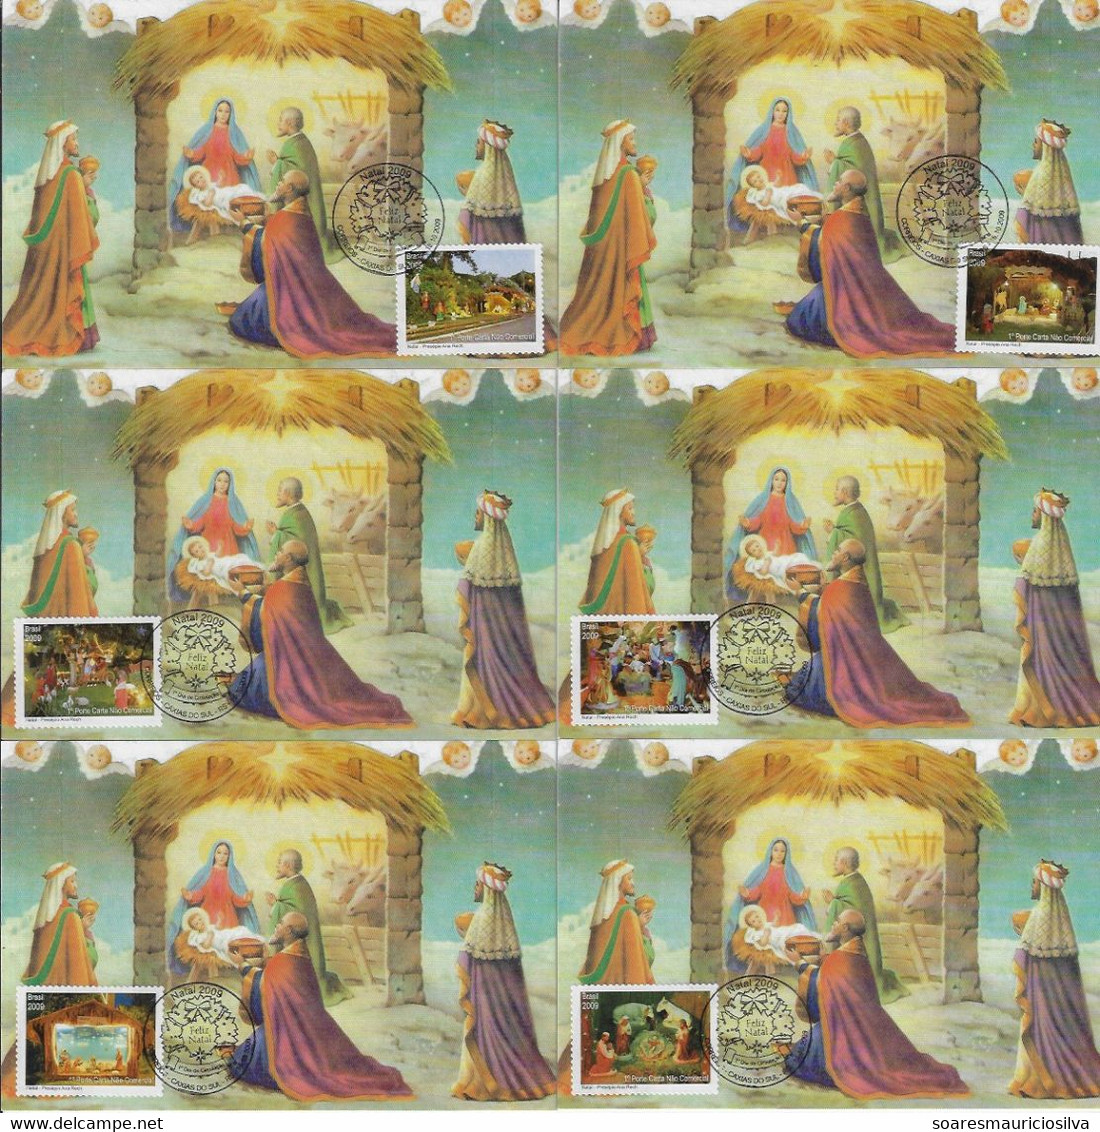 Brazil 2009 6 Different Maximum Card Stamp RHM-C-2911/2916 Christmas And Nativity Scenes By Ana Rech - Maximum Cards